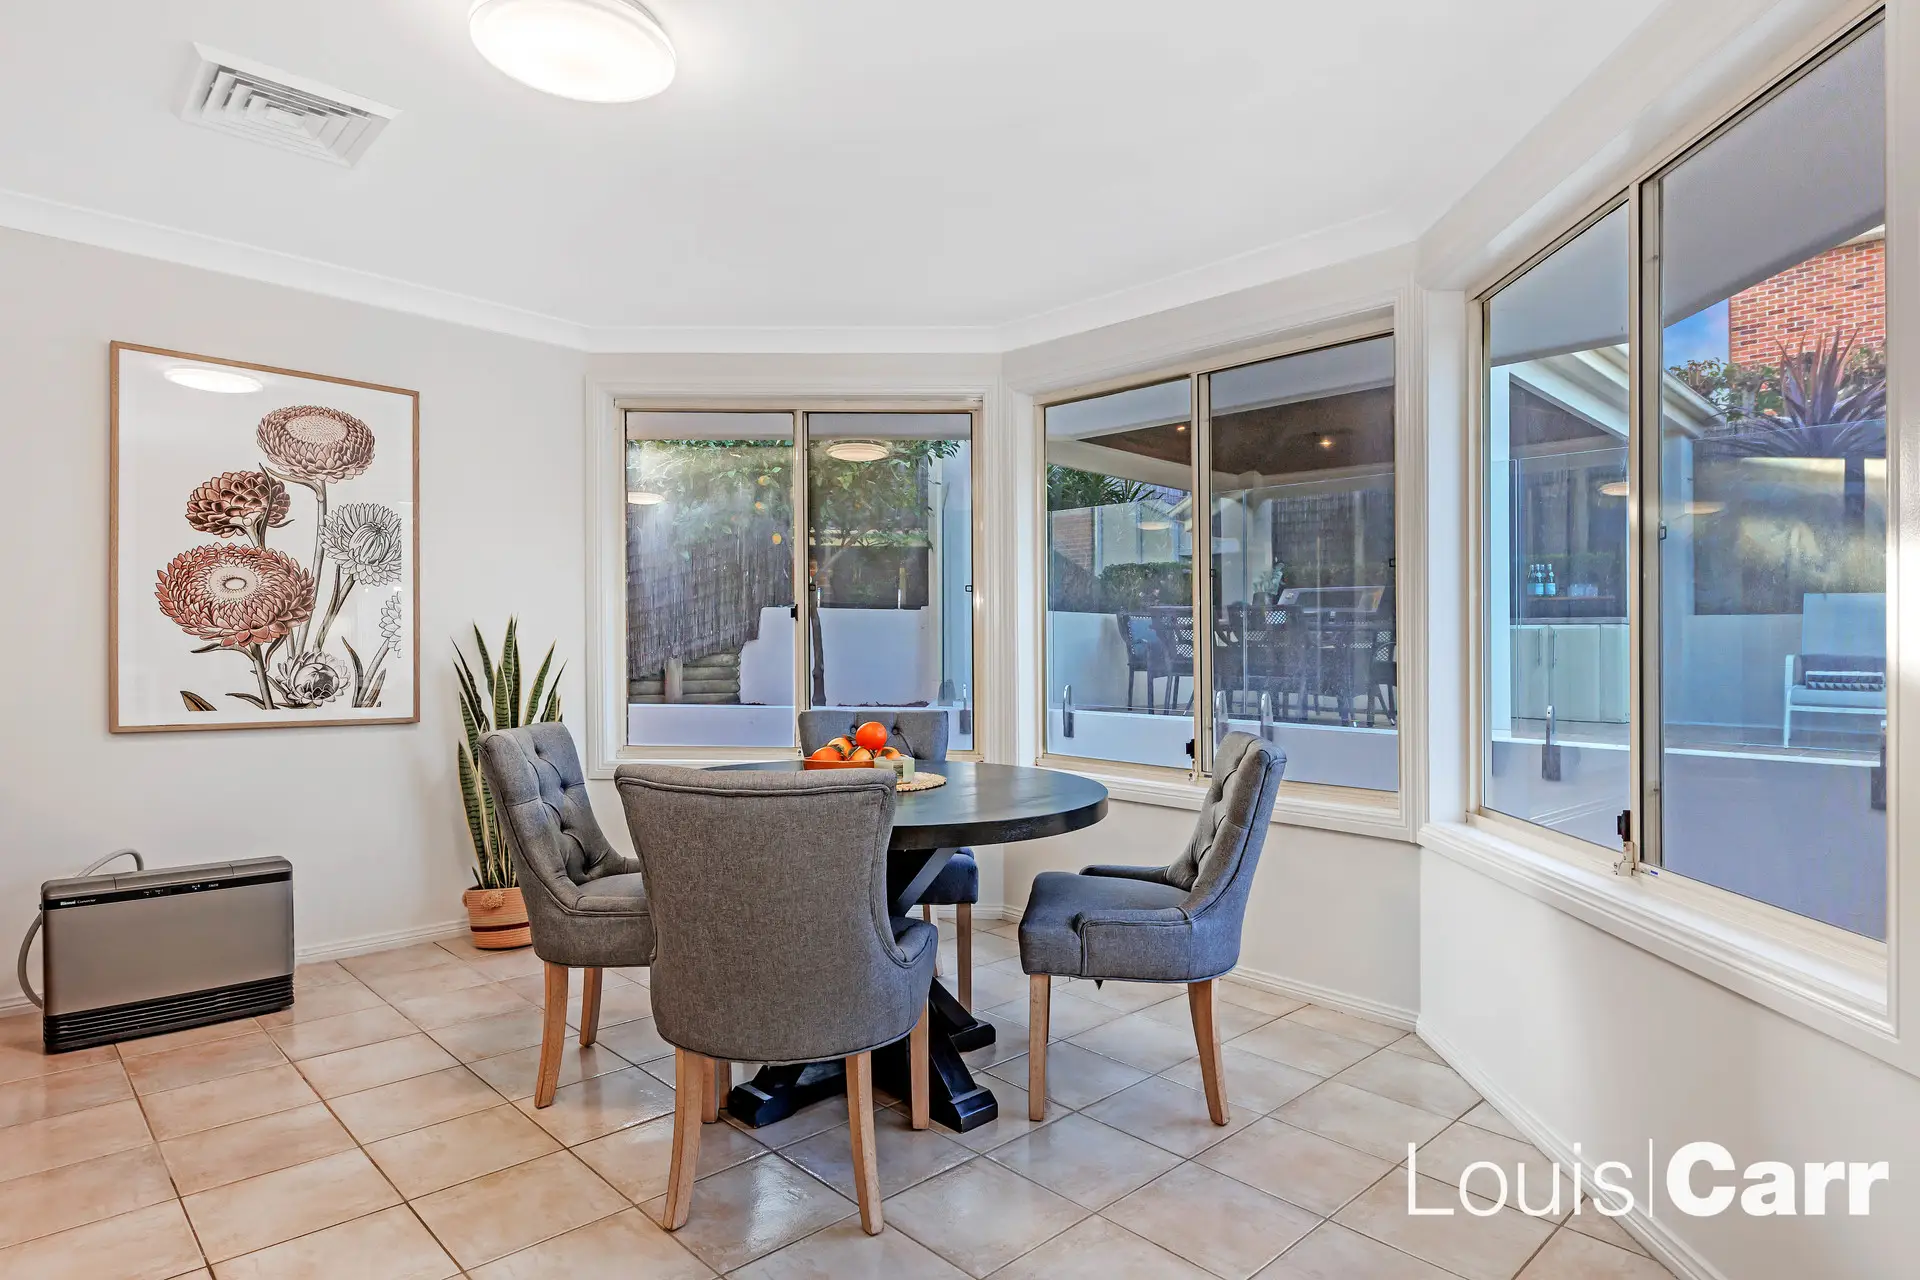 Photo #9: 66 Yaringa Road, Castle Hill - Sold by Louis Carr Real Estate